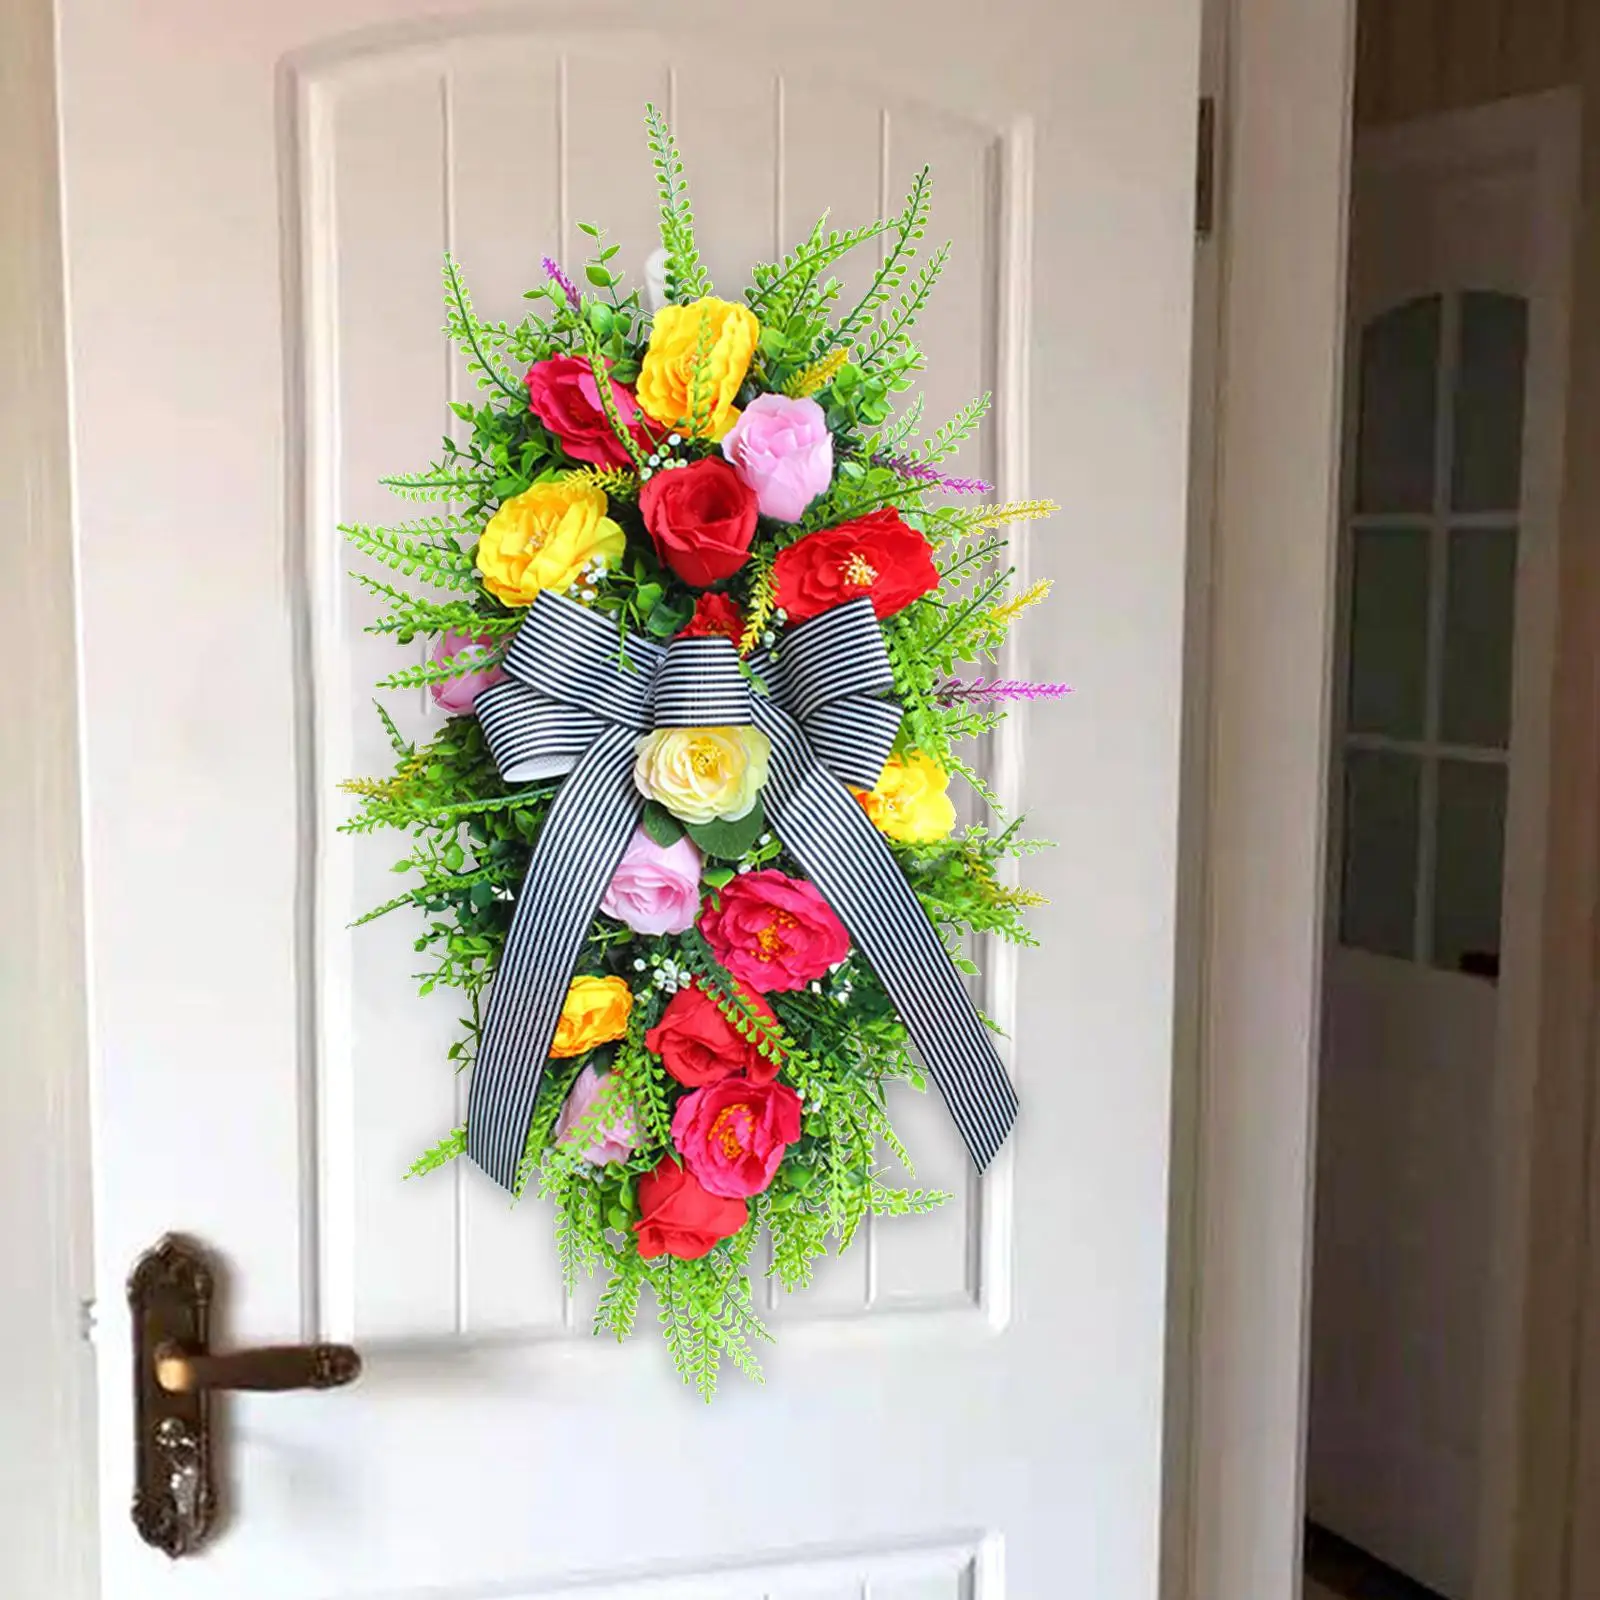 Door Swag Wreaths Floral Teardrop Swag Artificial Flower Wreath Hanging for Fireplace Festival Windows Housewarming Anniversary